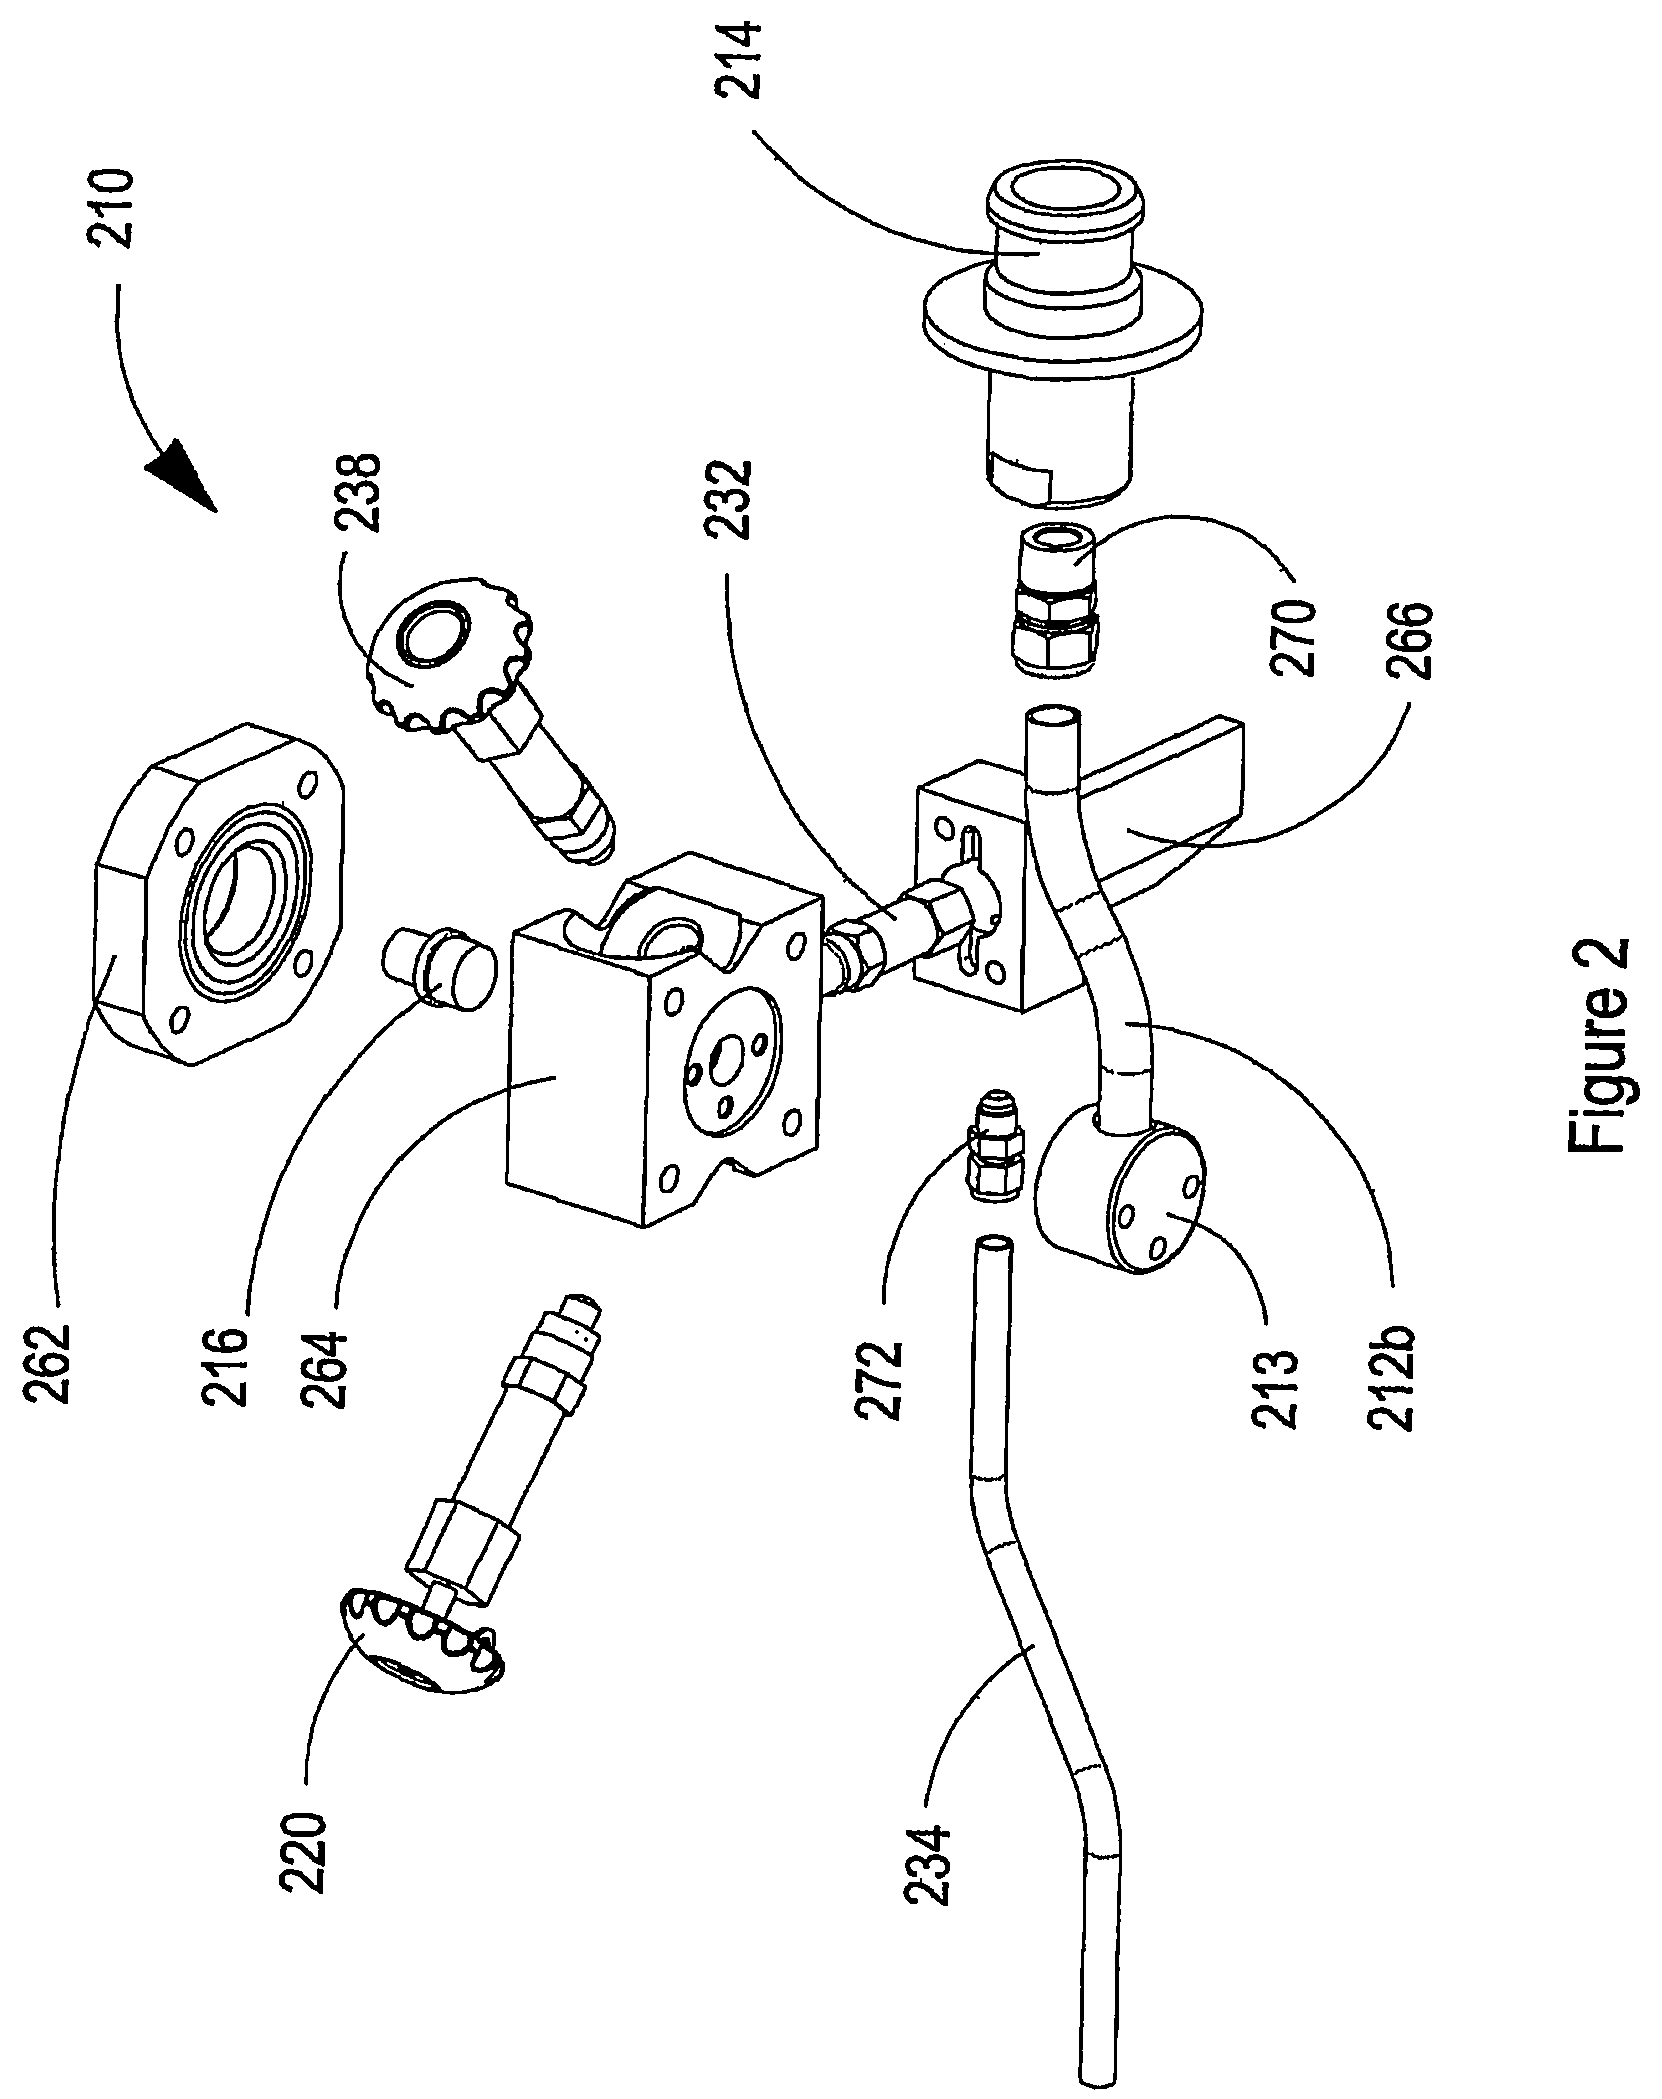 Storage tank for a cryogenic liquid and method of re-filling same